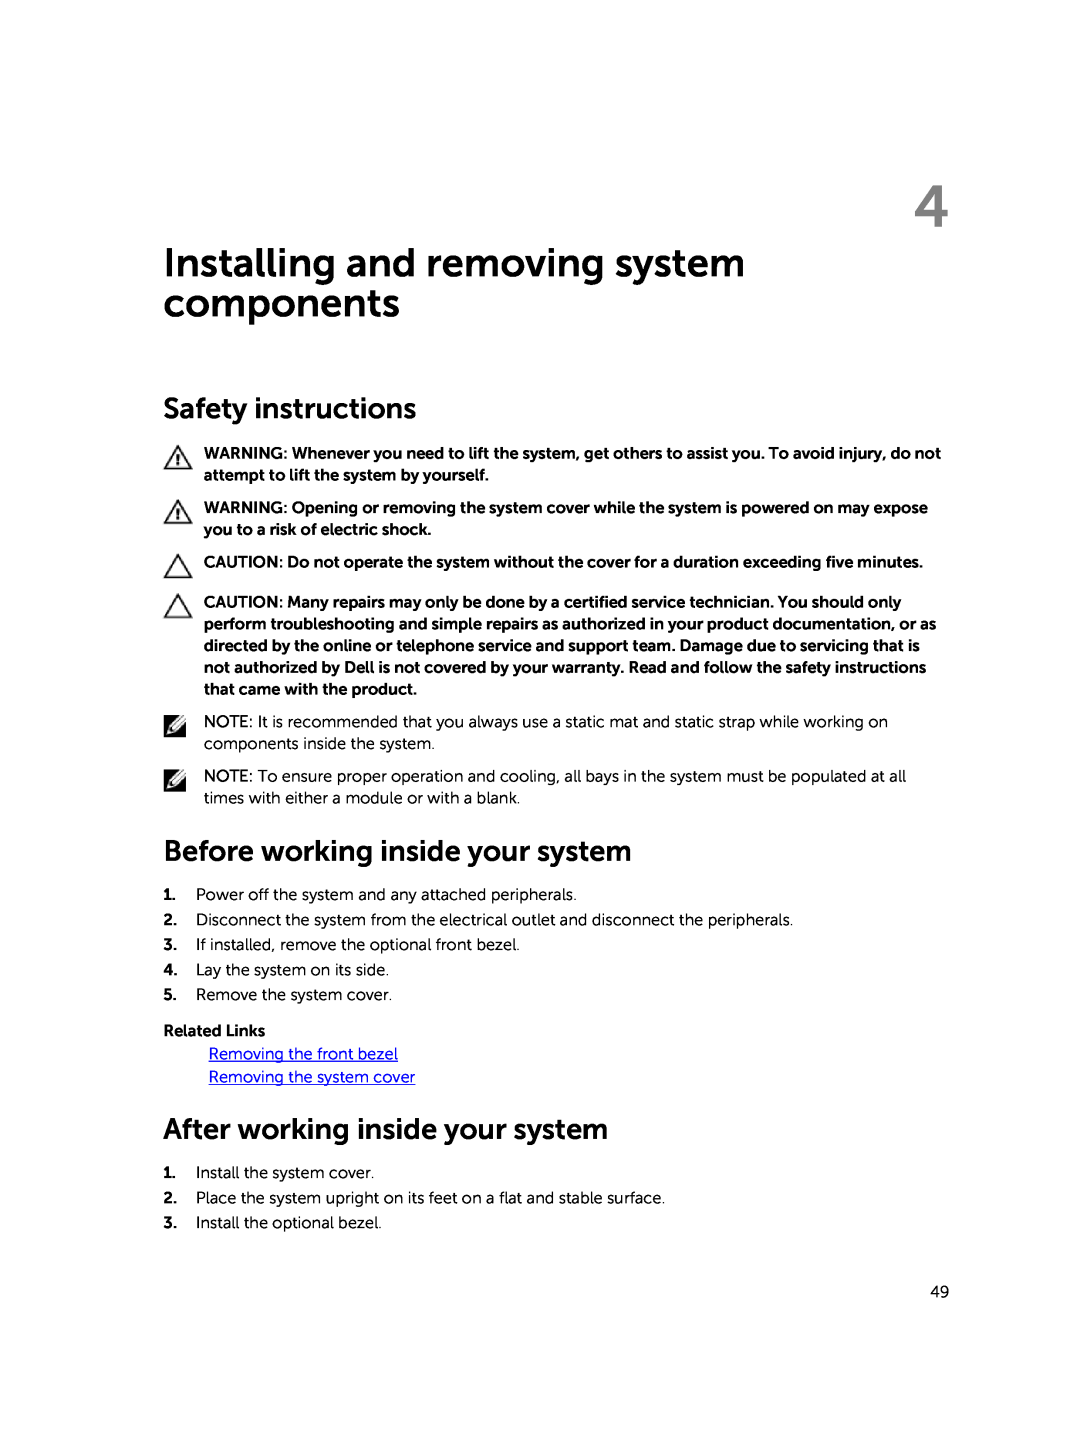 Dell E30S owner manual Installing and removing system components, Safety instructions, Before working inside your system 